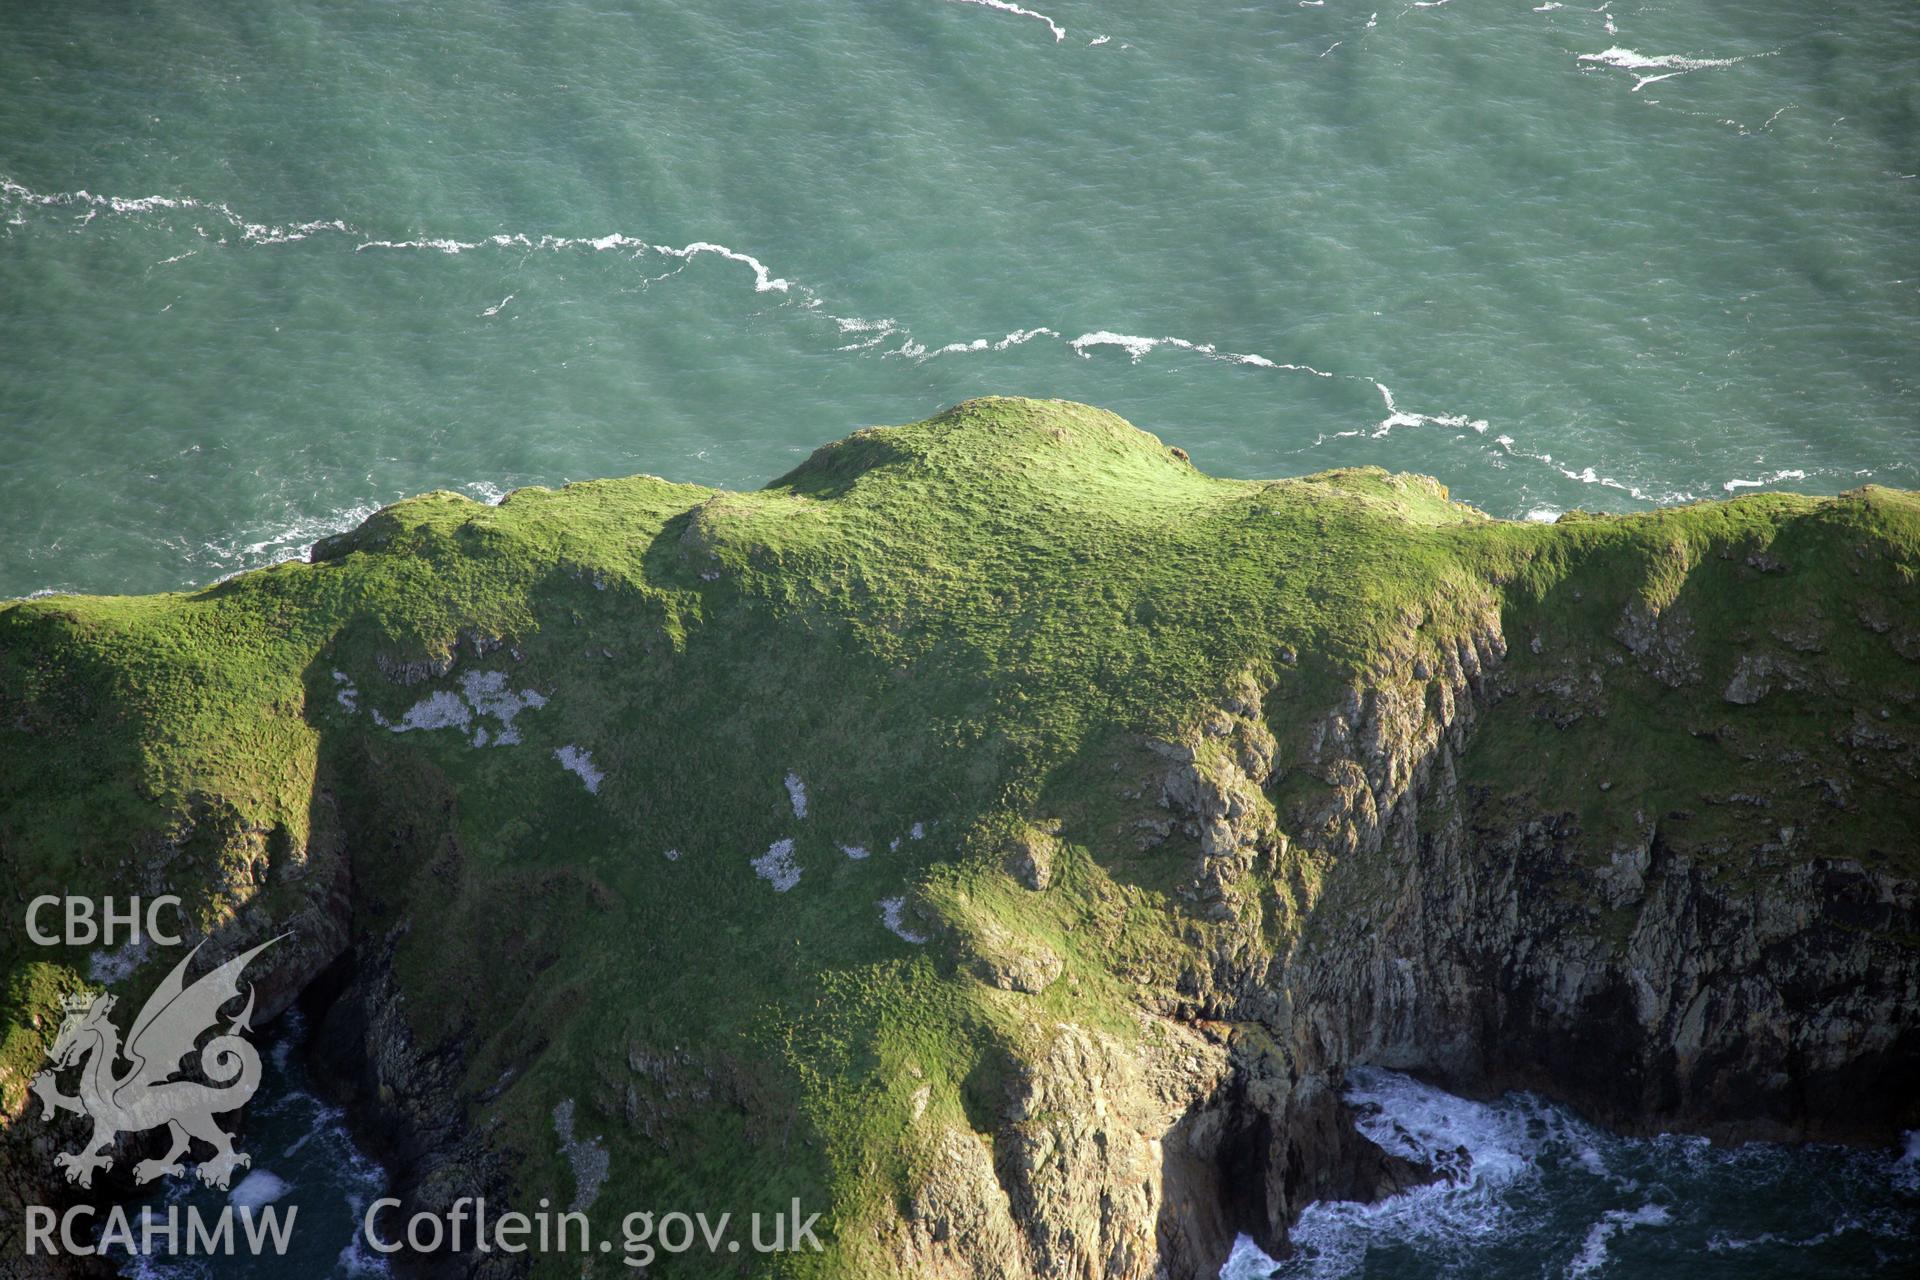 RCAHMW colour oblique photograph of Ynys Bery, Ramsey Island,. Taken by O. Davies & T. Driver on 22/11/2013.